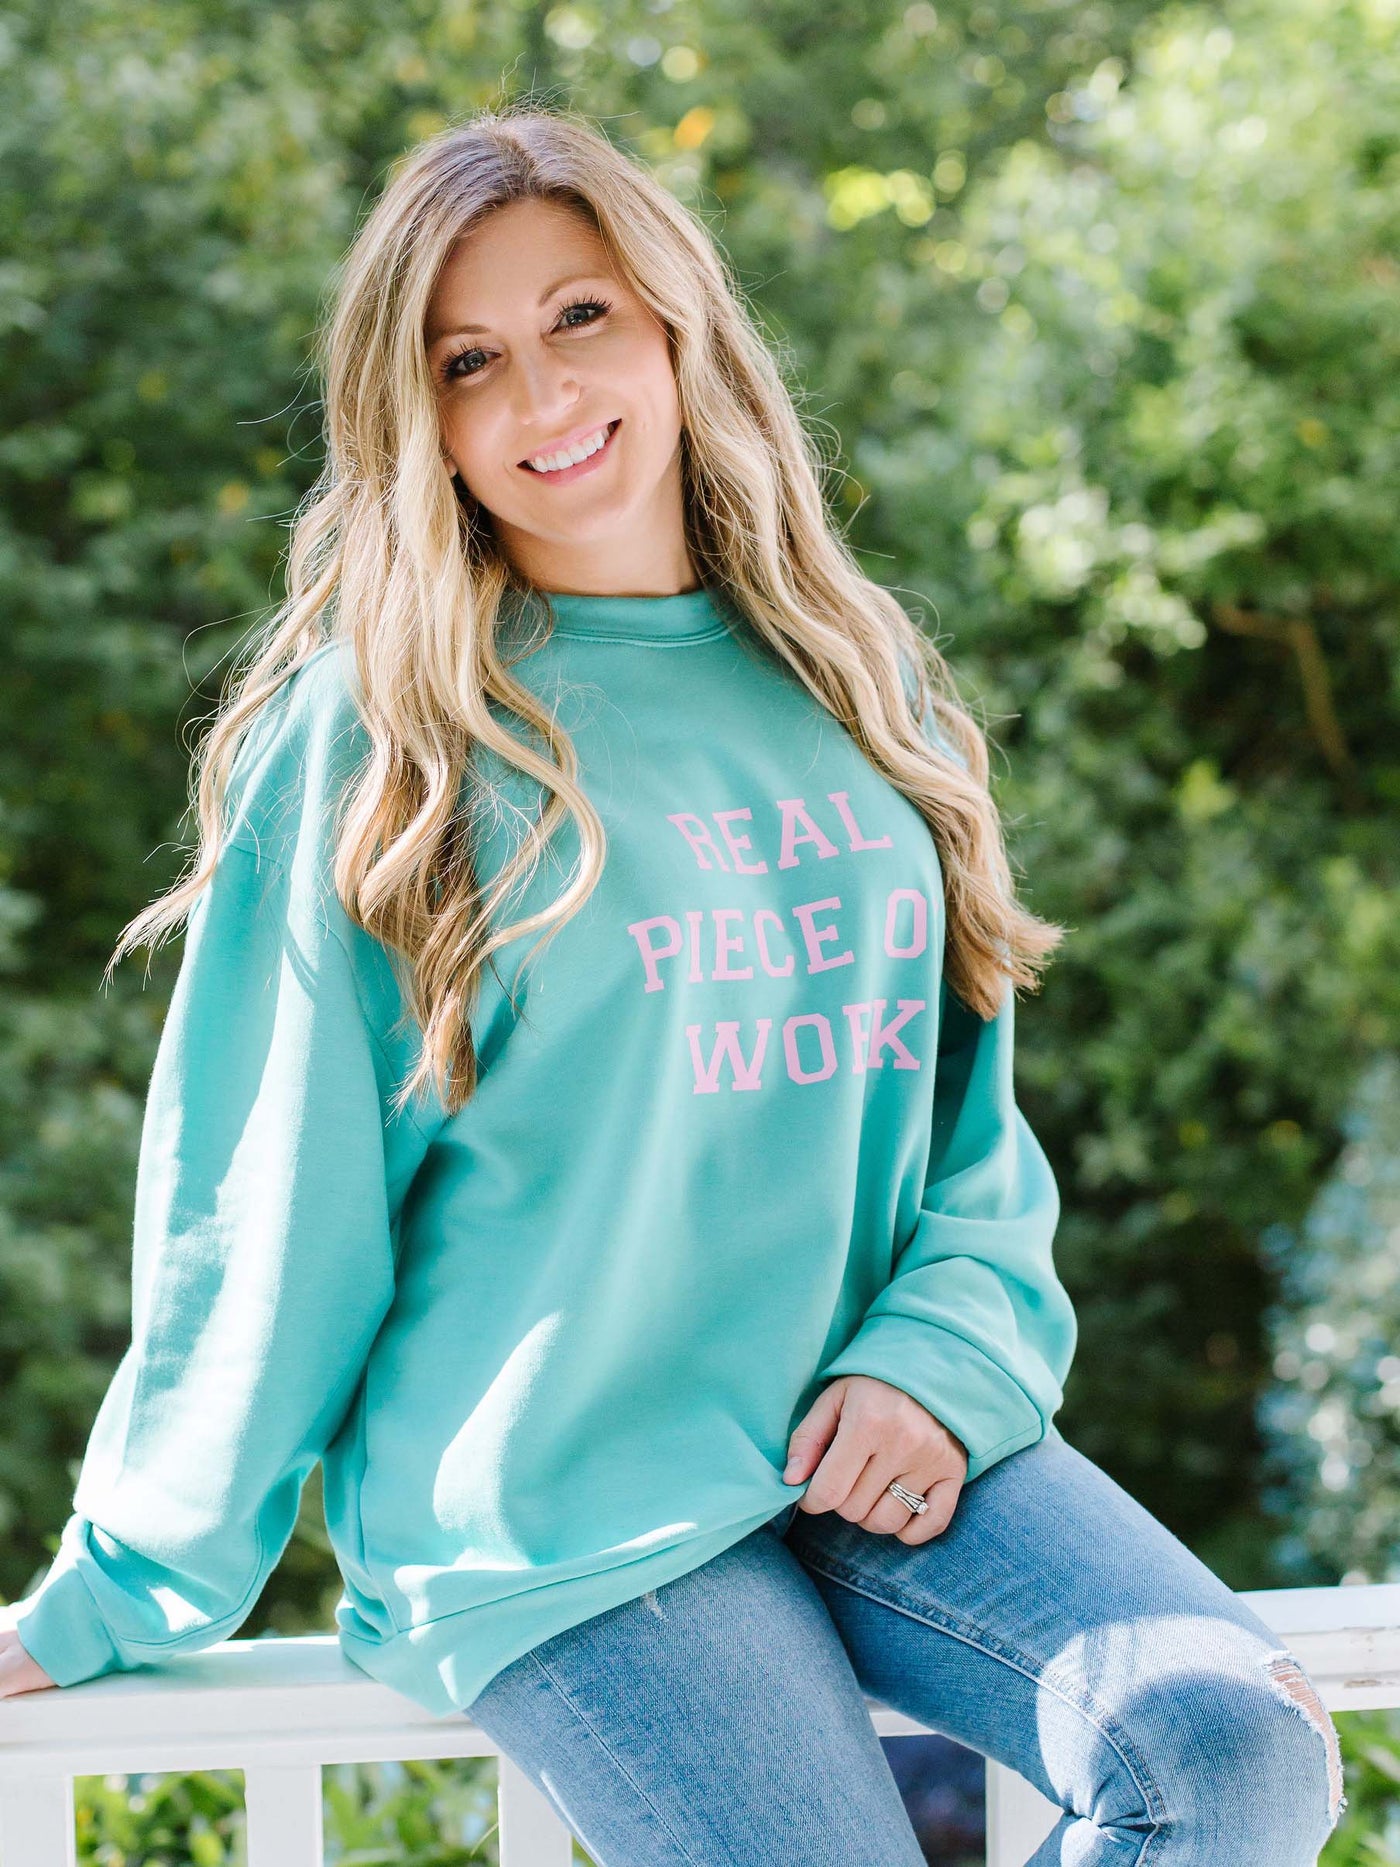 FINAL SALE - Real Piece of Work | Jules Sweatshirt - Mary Square, LLC